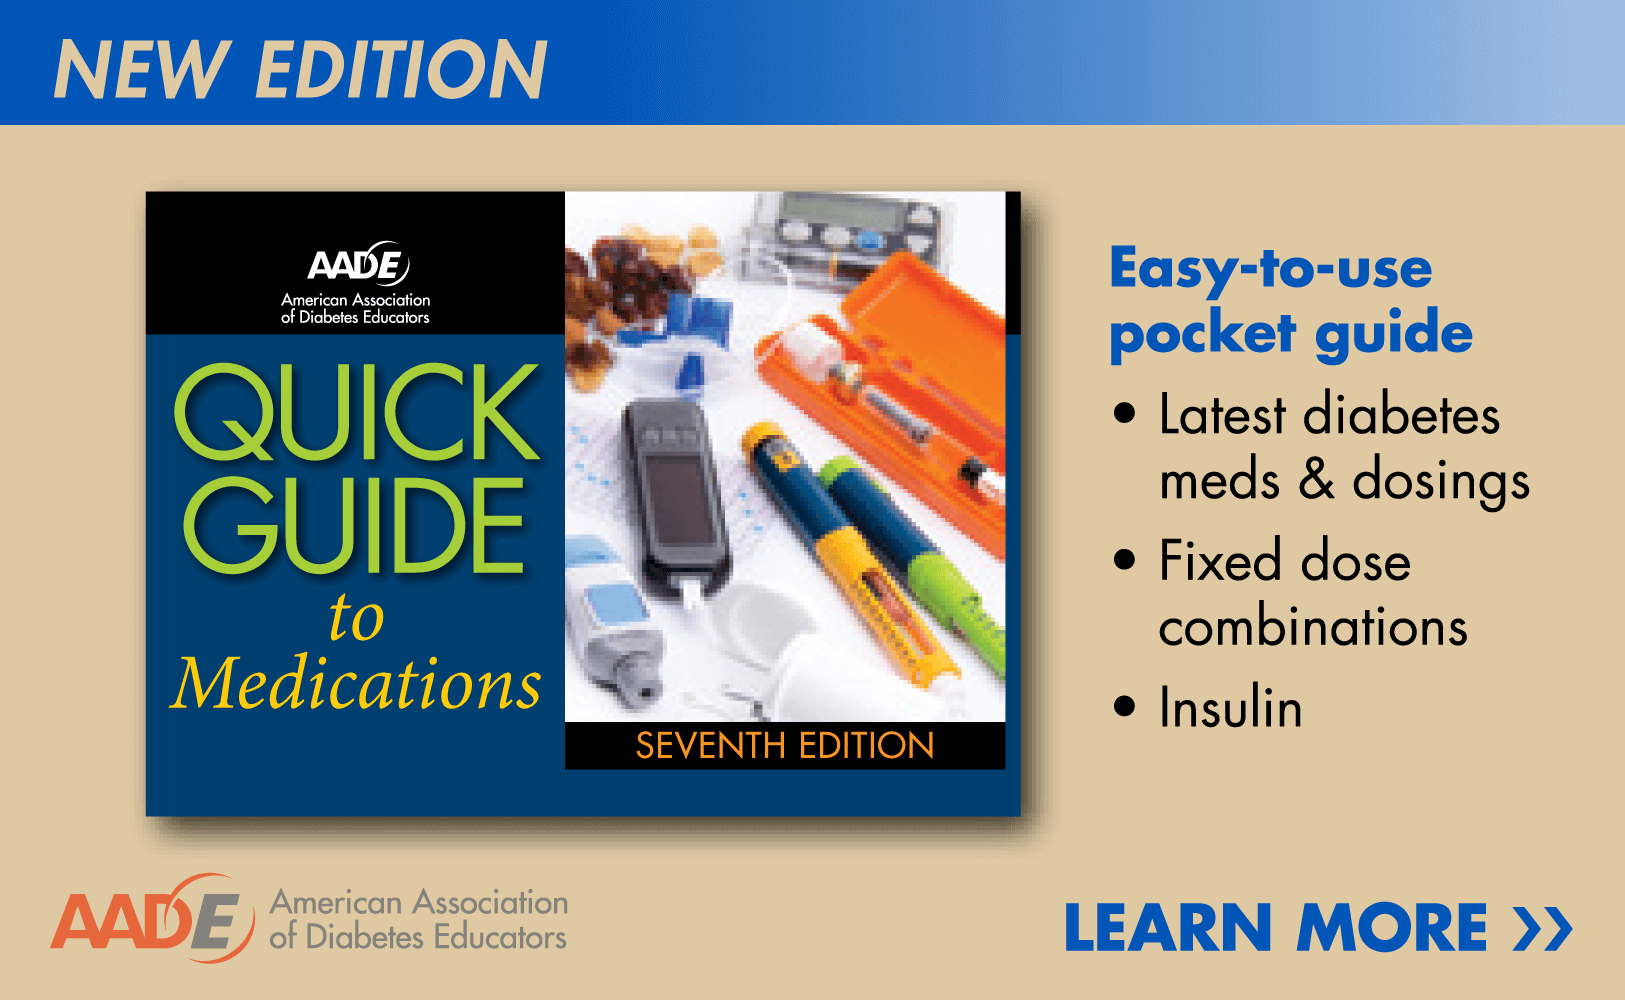 AADE-quick-guide-to-meds-ad-13-8-rev